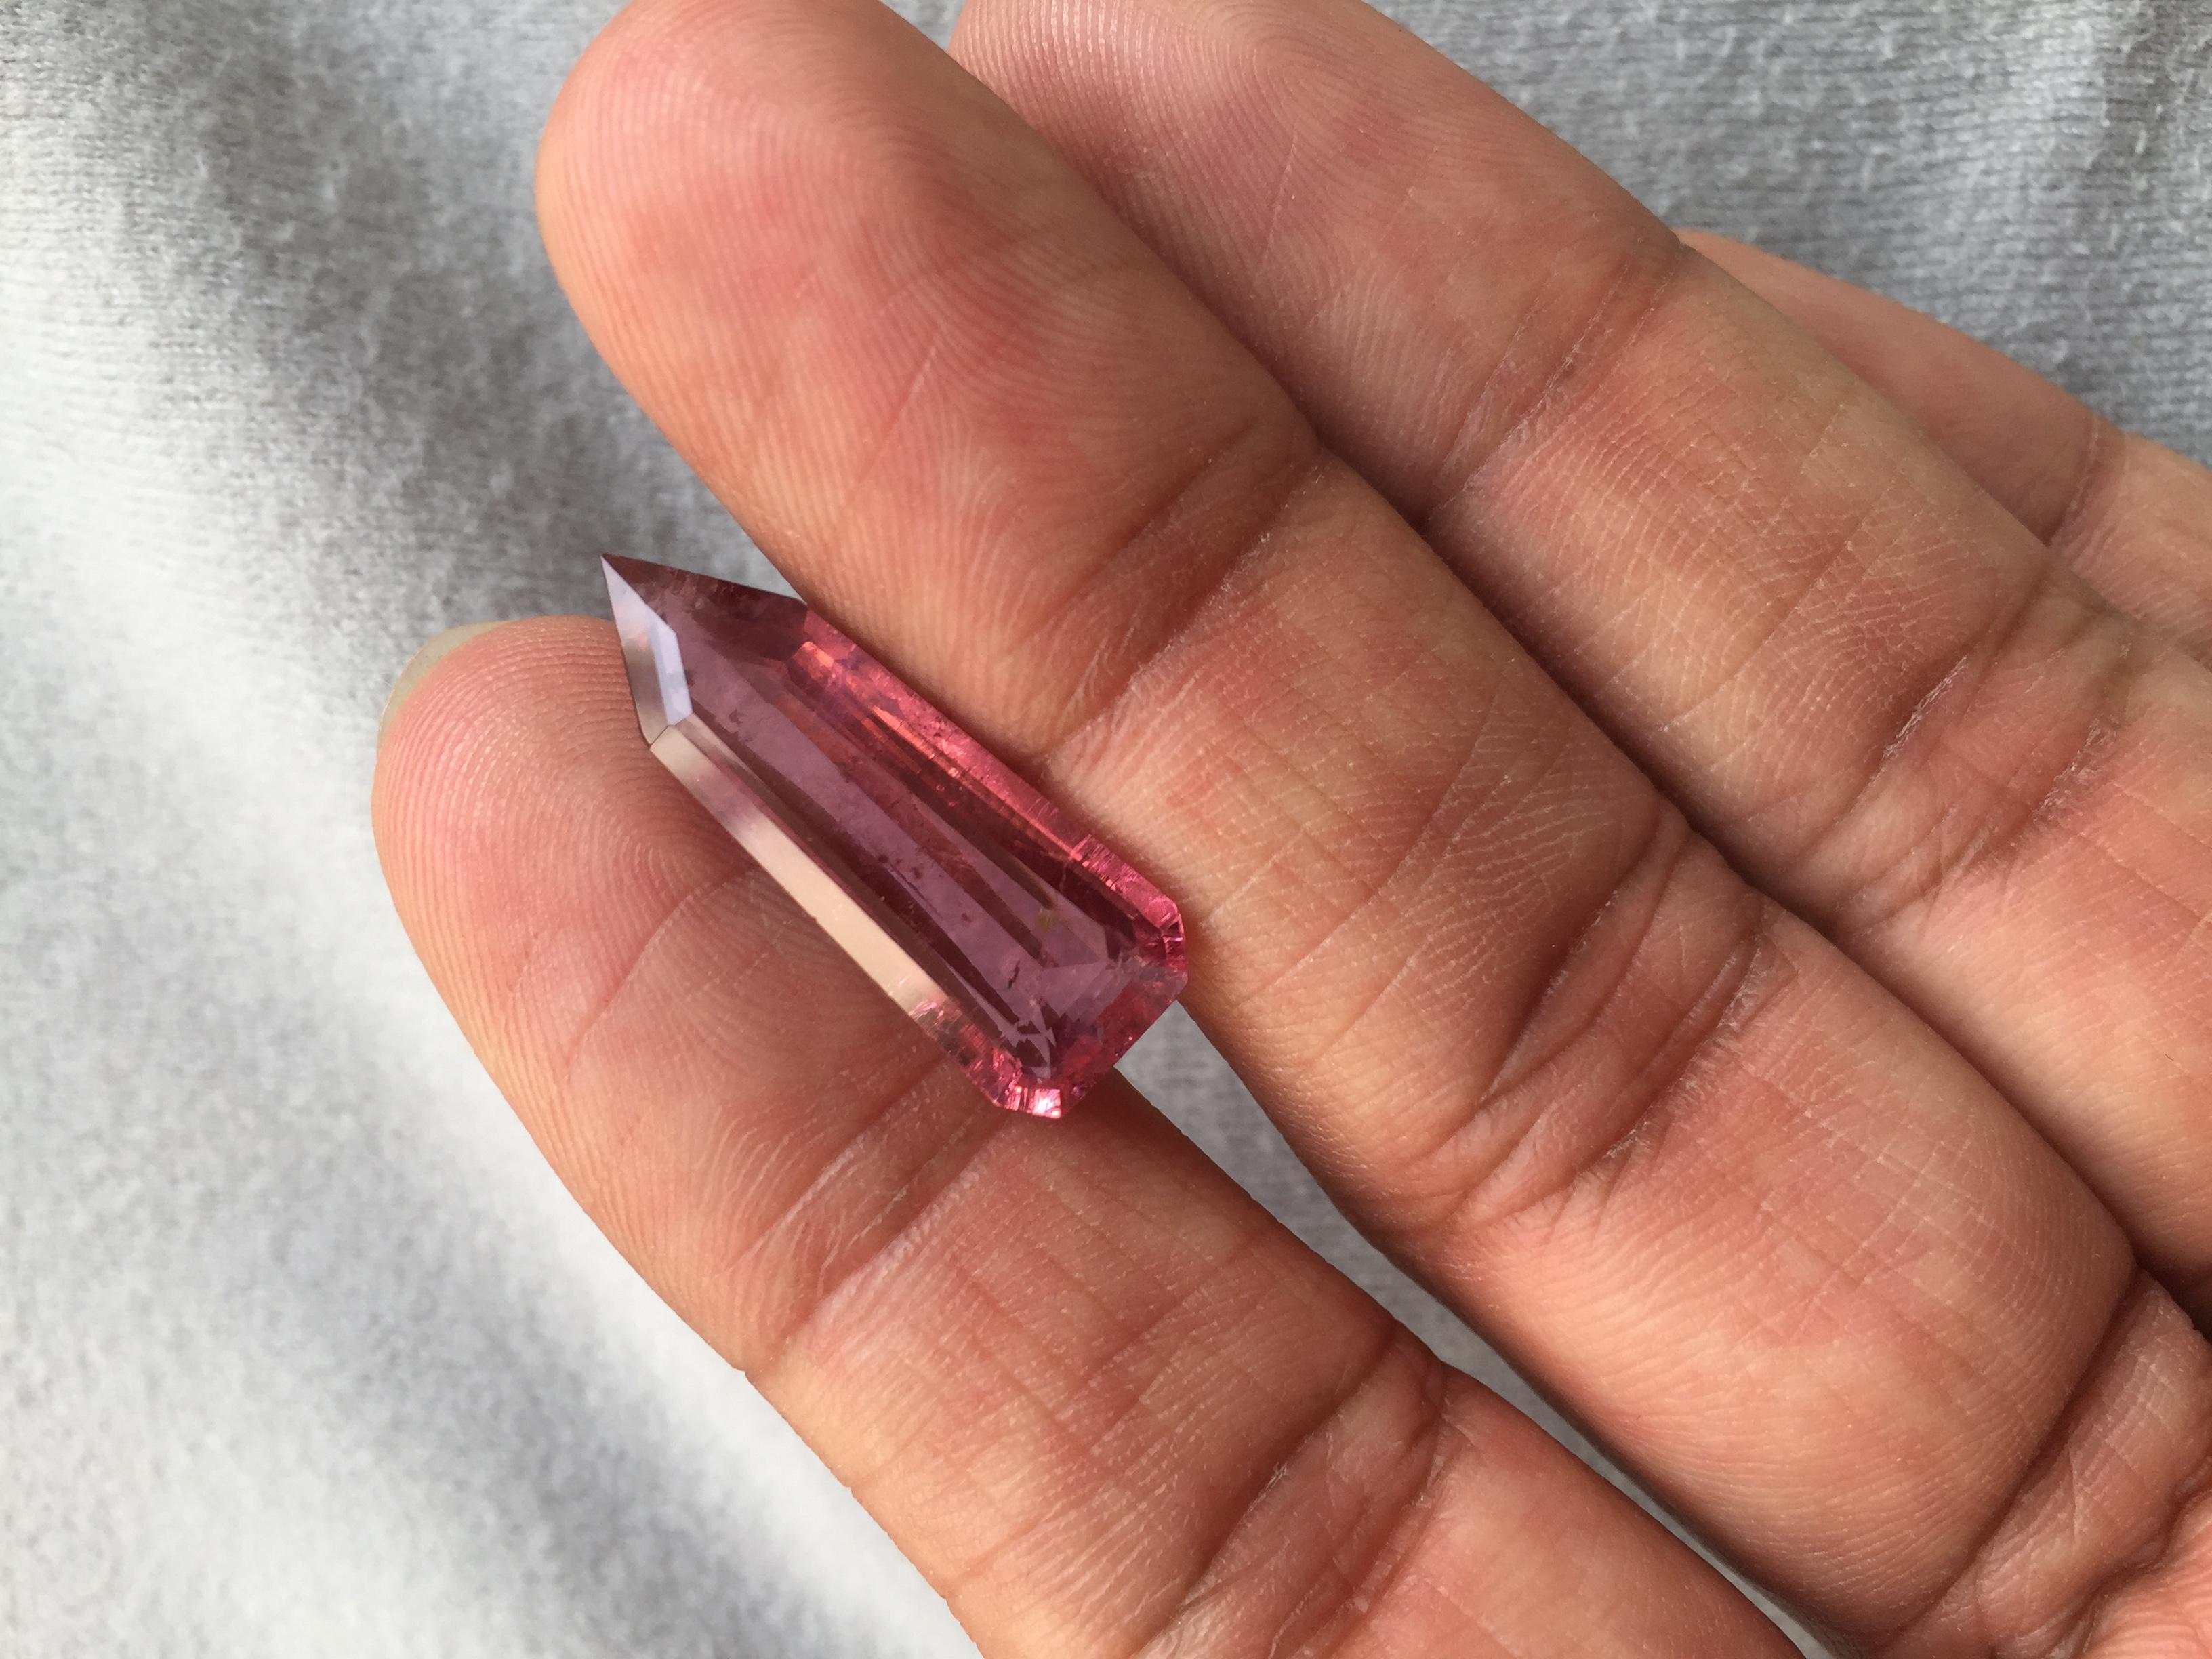 Introducing our 8.96 Carat Pink Tourmaline Fancy Cut, the perfect gemstone for high-end jewelry. Crafted from high-quality tourmaline, this stunning gemstone features a gorgeous pink that is both elegant and sophisticated. The elongated cut of the